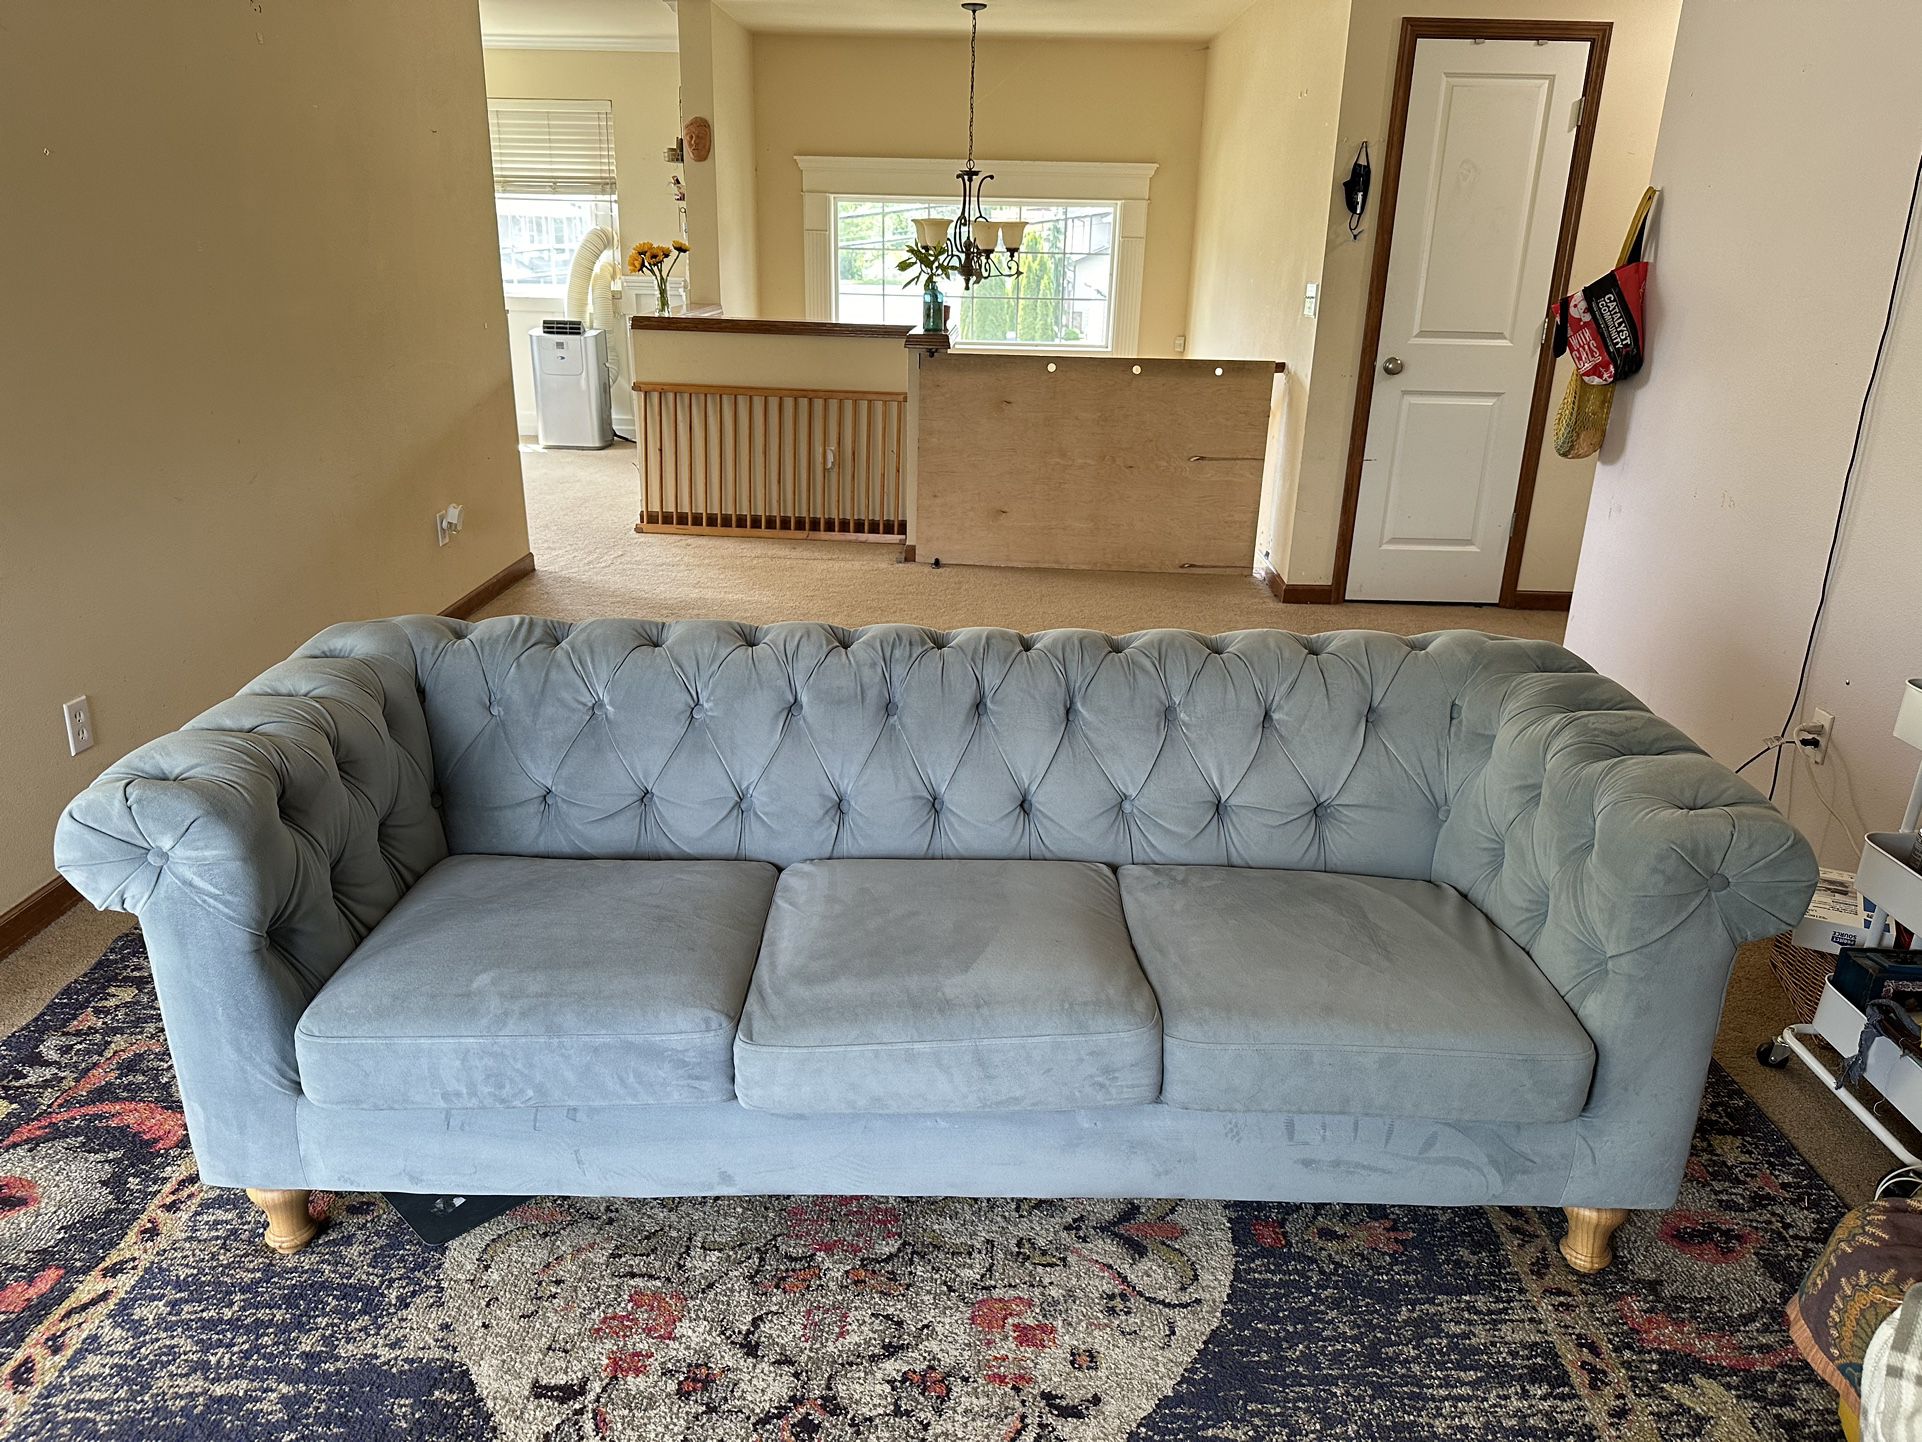  Quentin Chesterfield Velvet Sofa / Couch